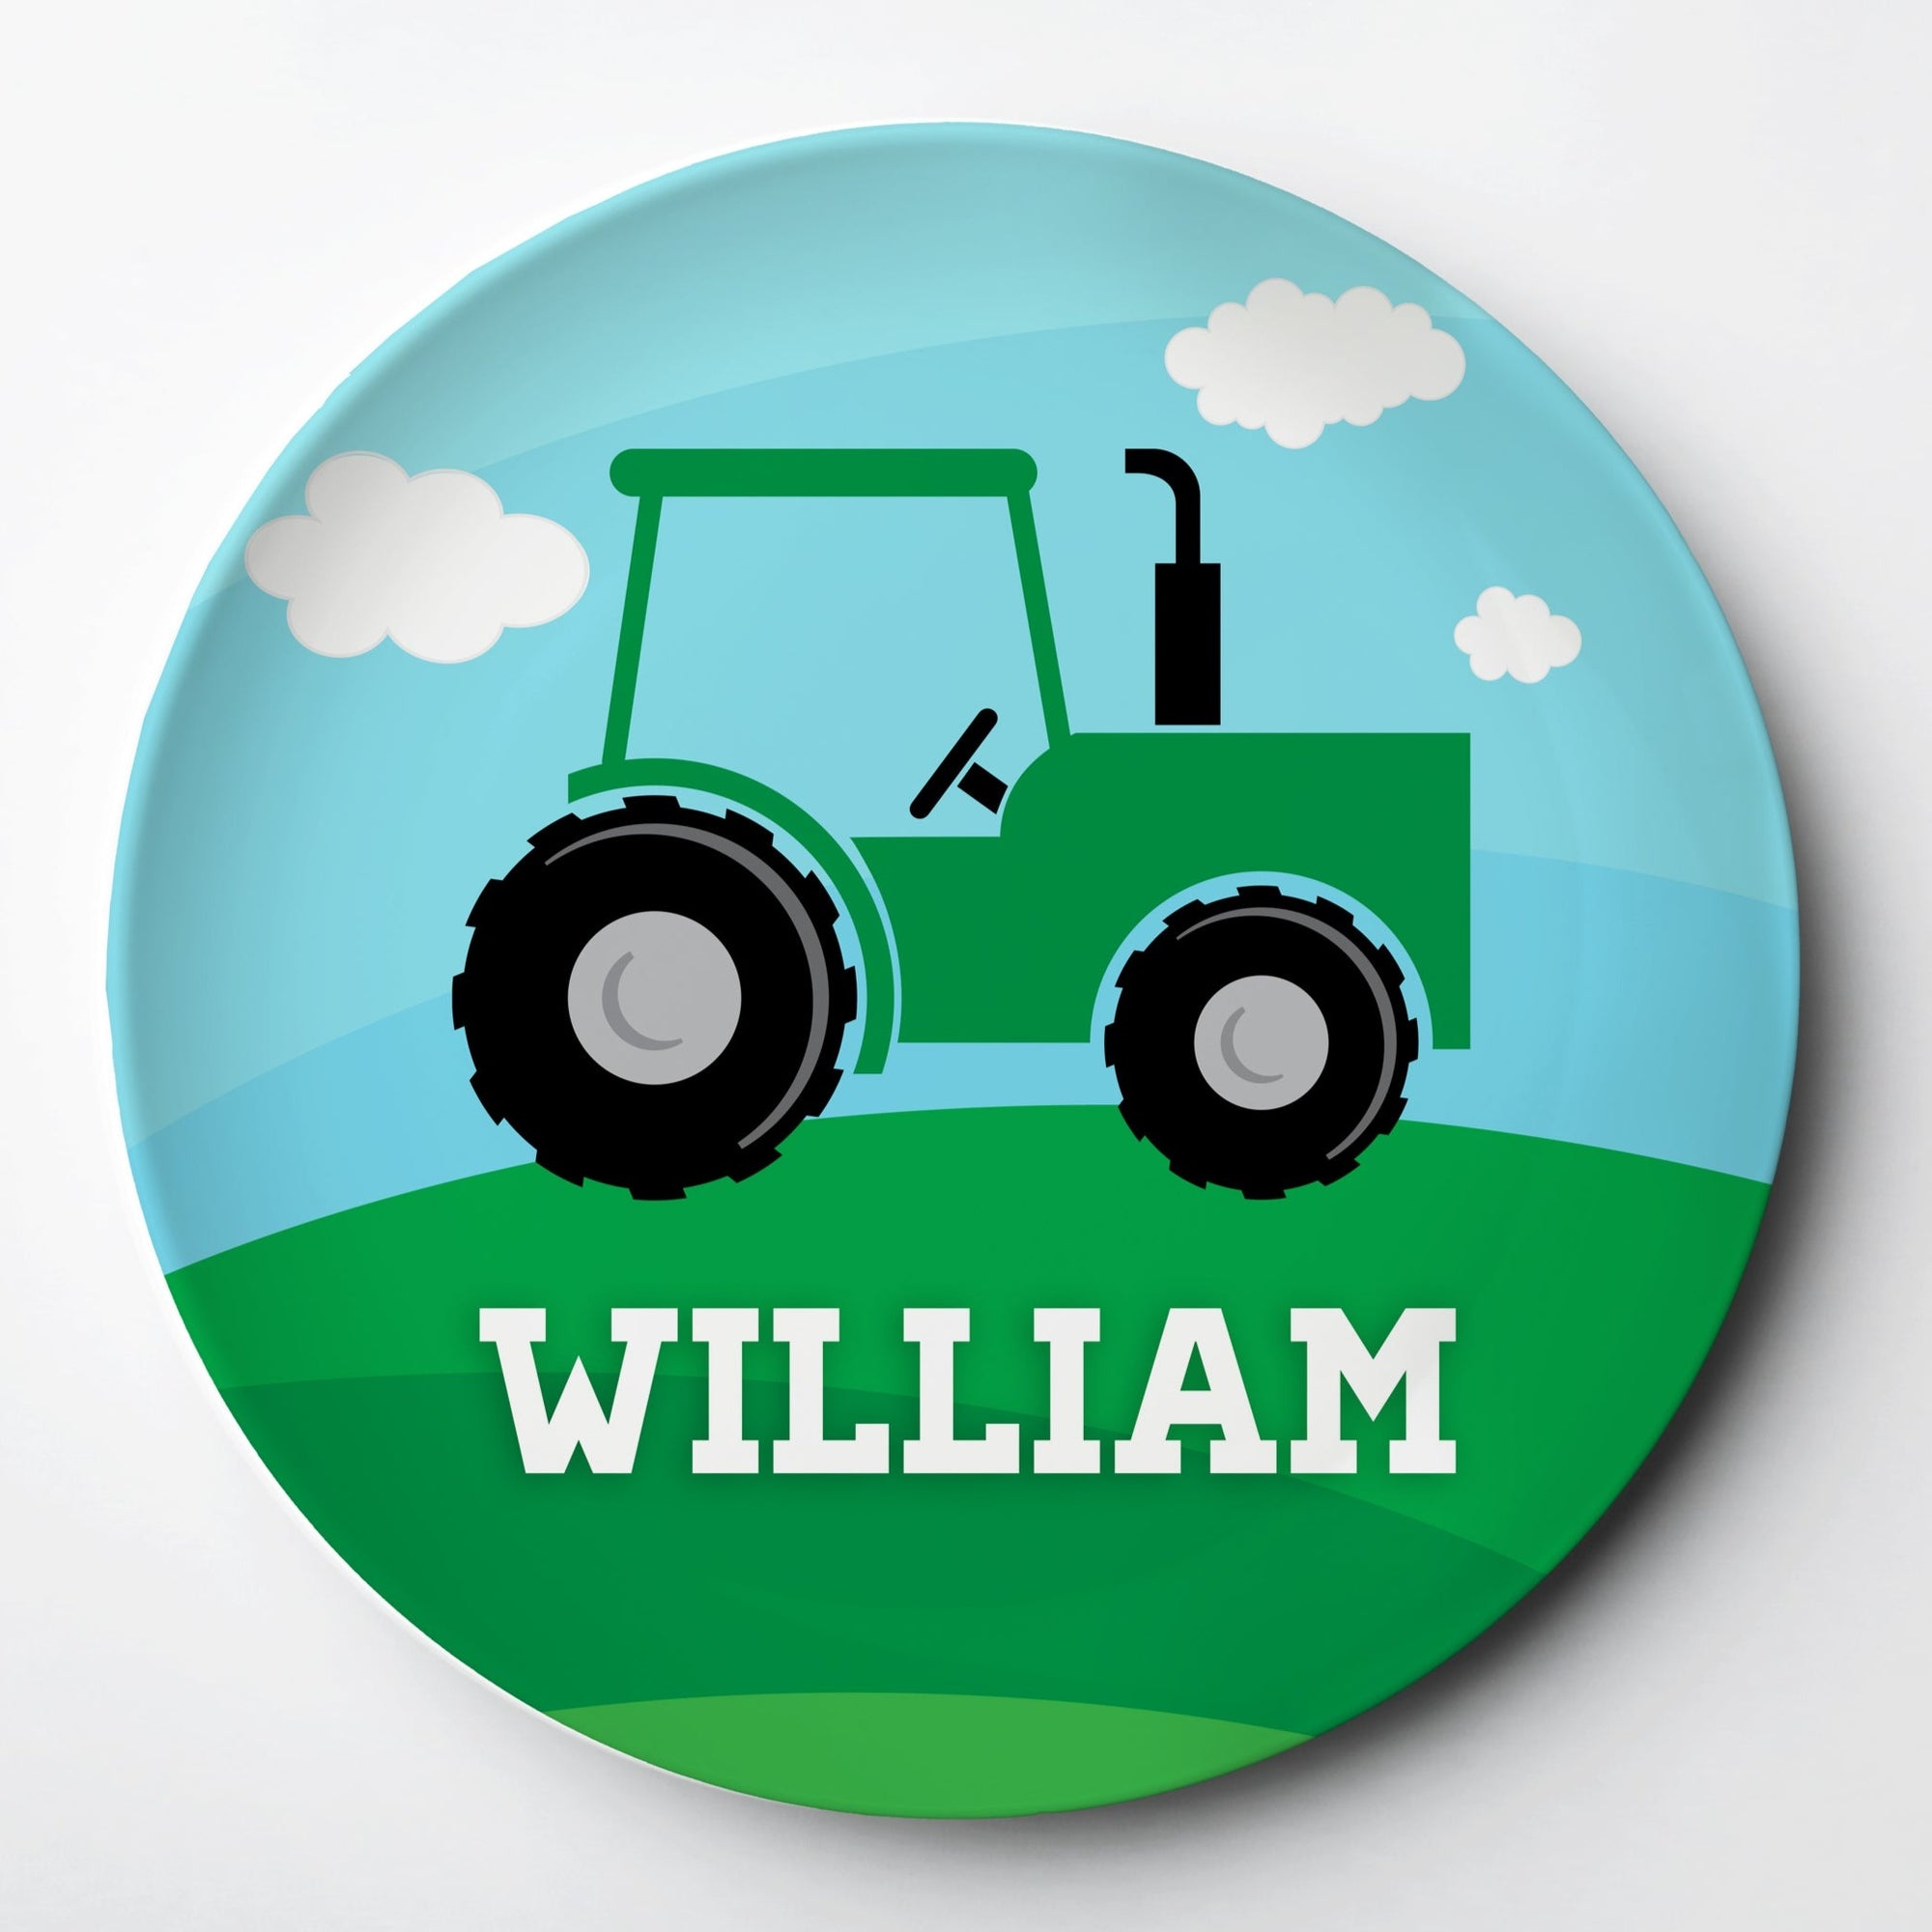 Tractor Personalized Kids plate, reusable sturdy polymer, microwave, oven, and dishwasher safe